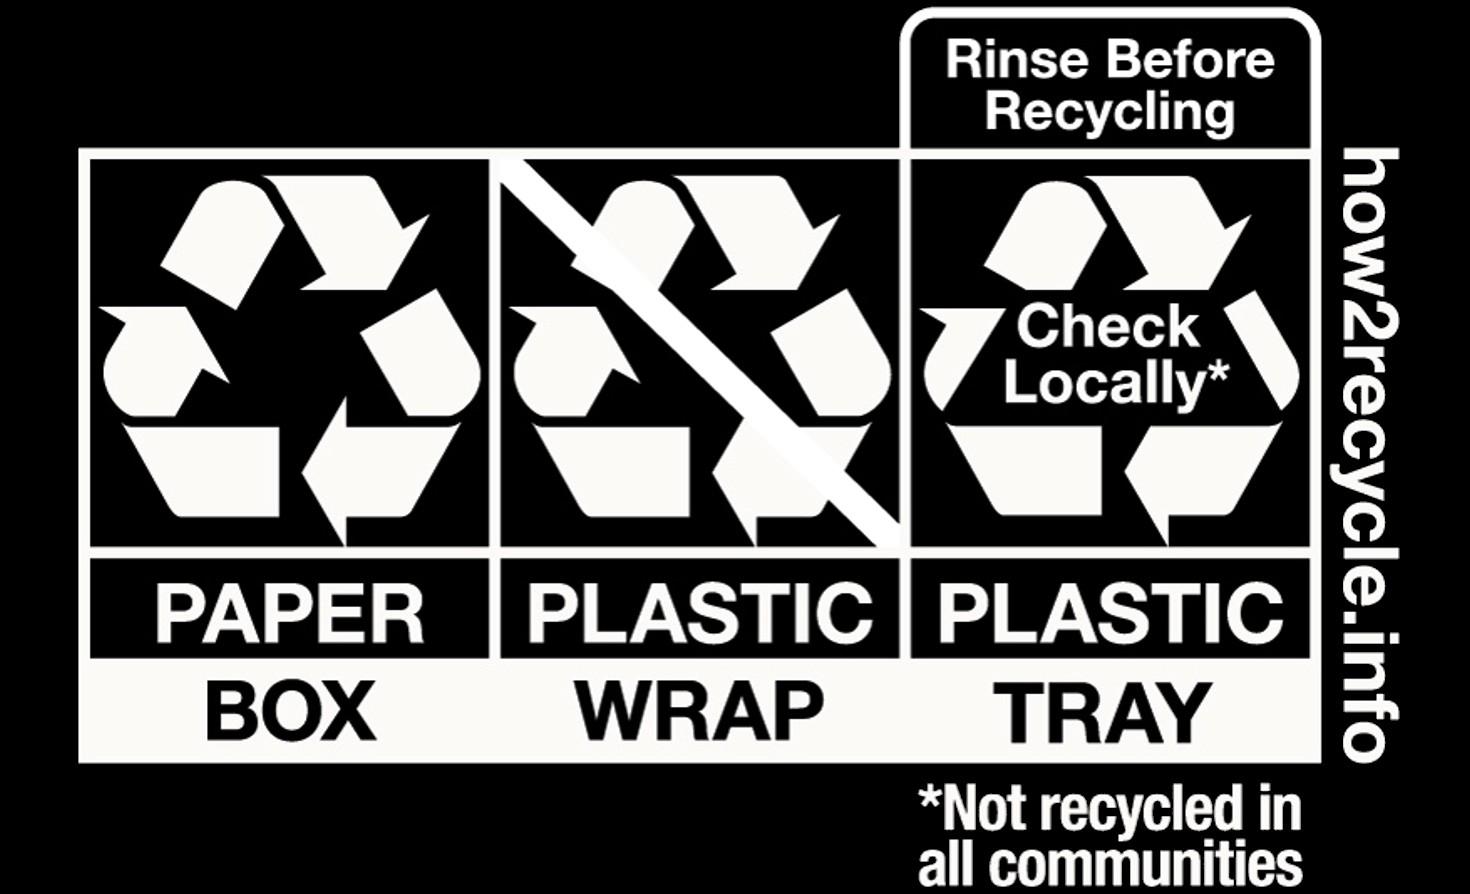 The How2Recycle label appears on products from hundreds of brands.